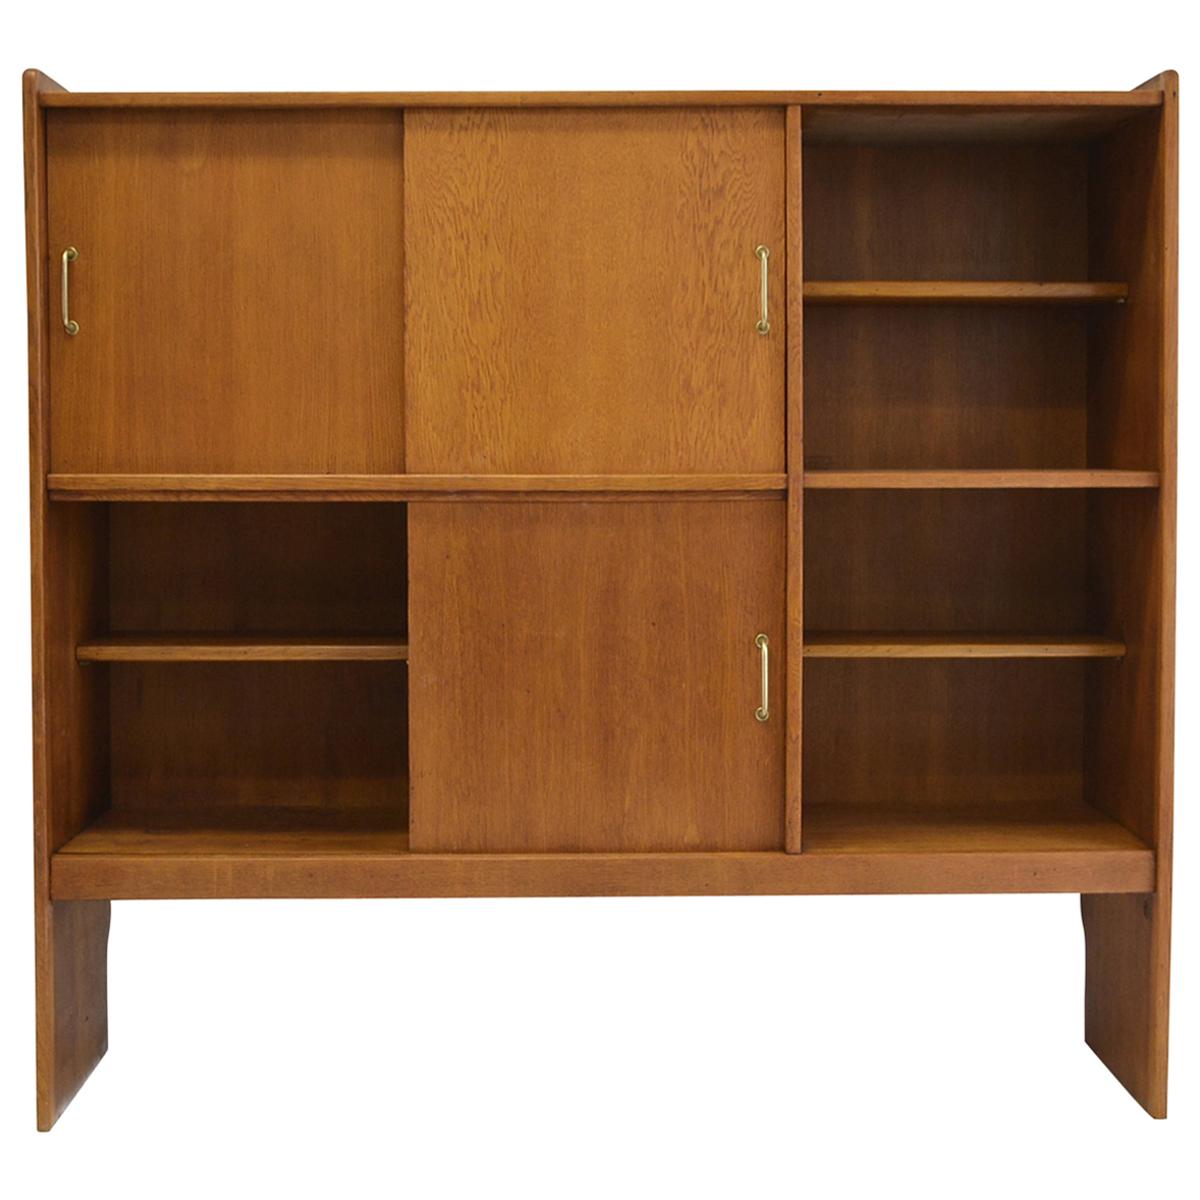 1957, Rare Bookcase by Roger Landault